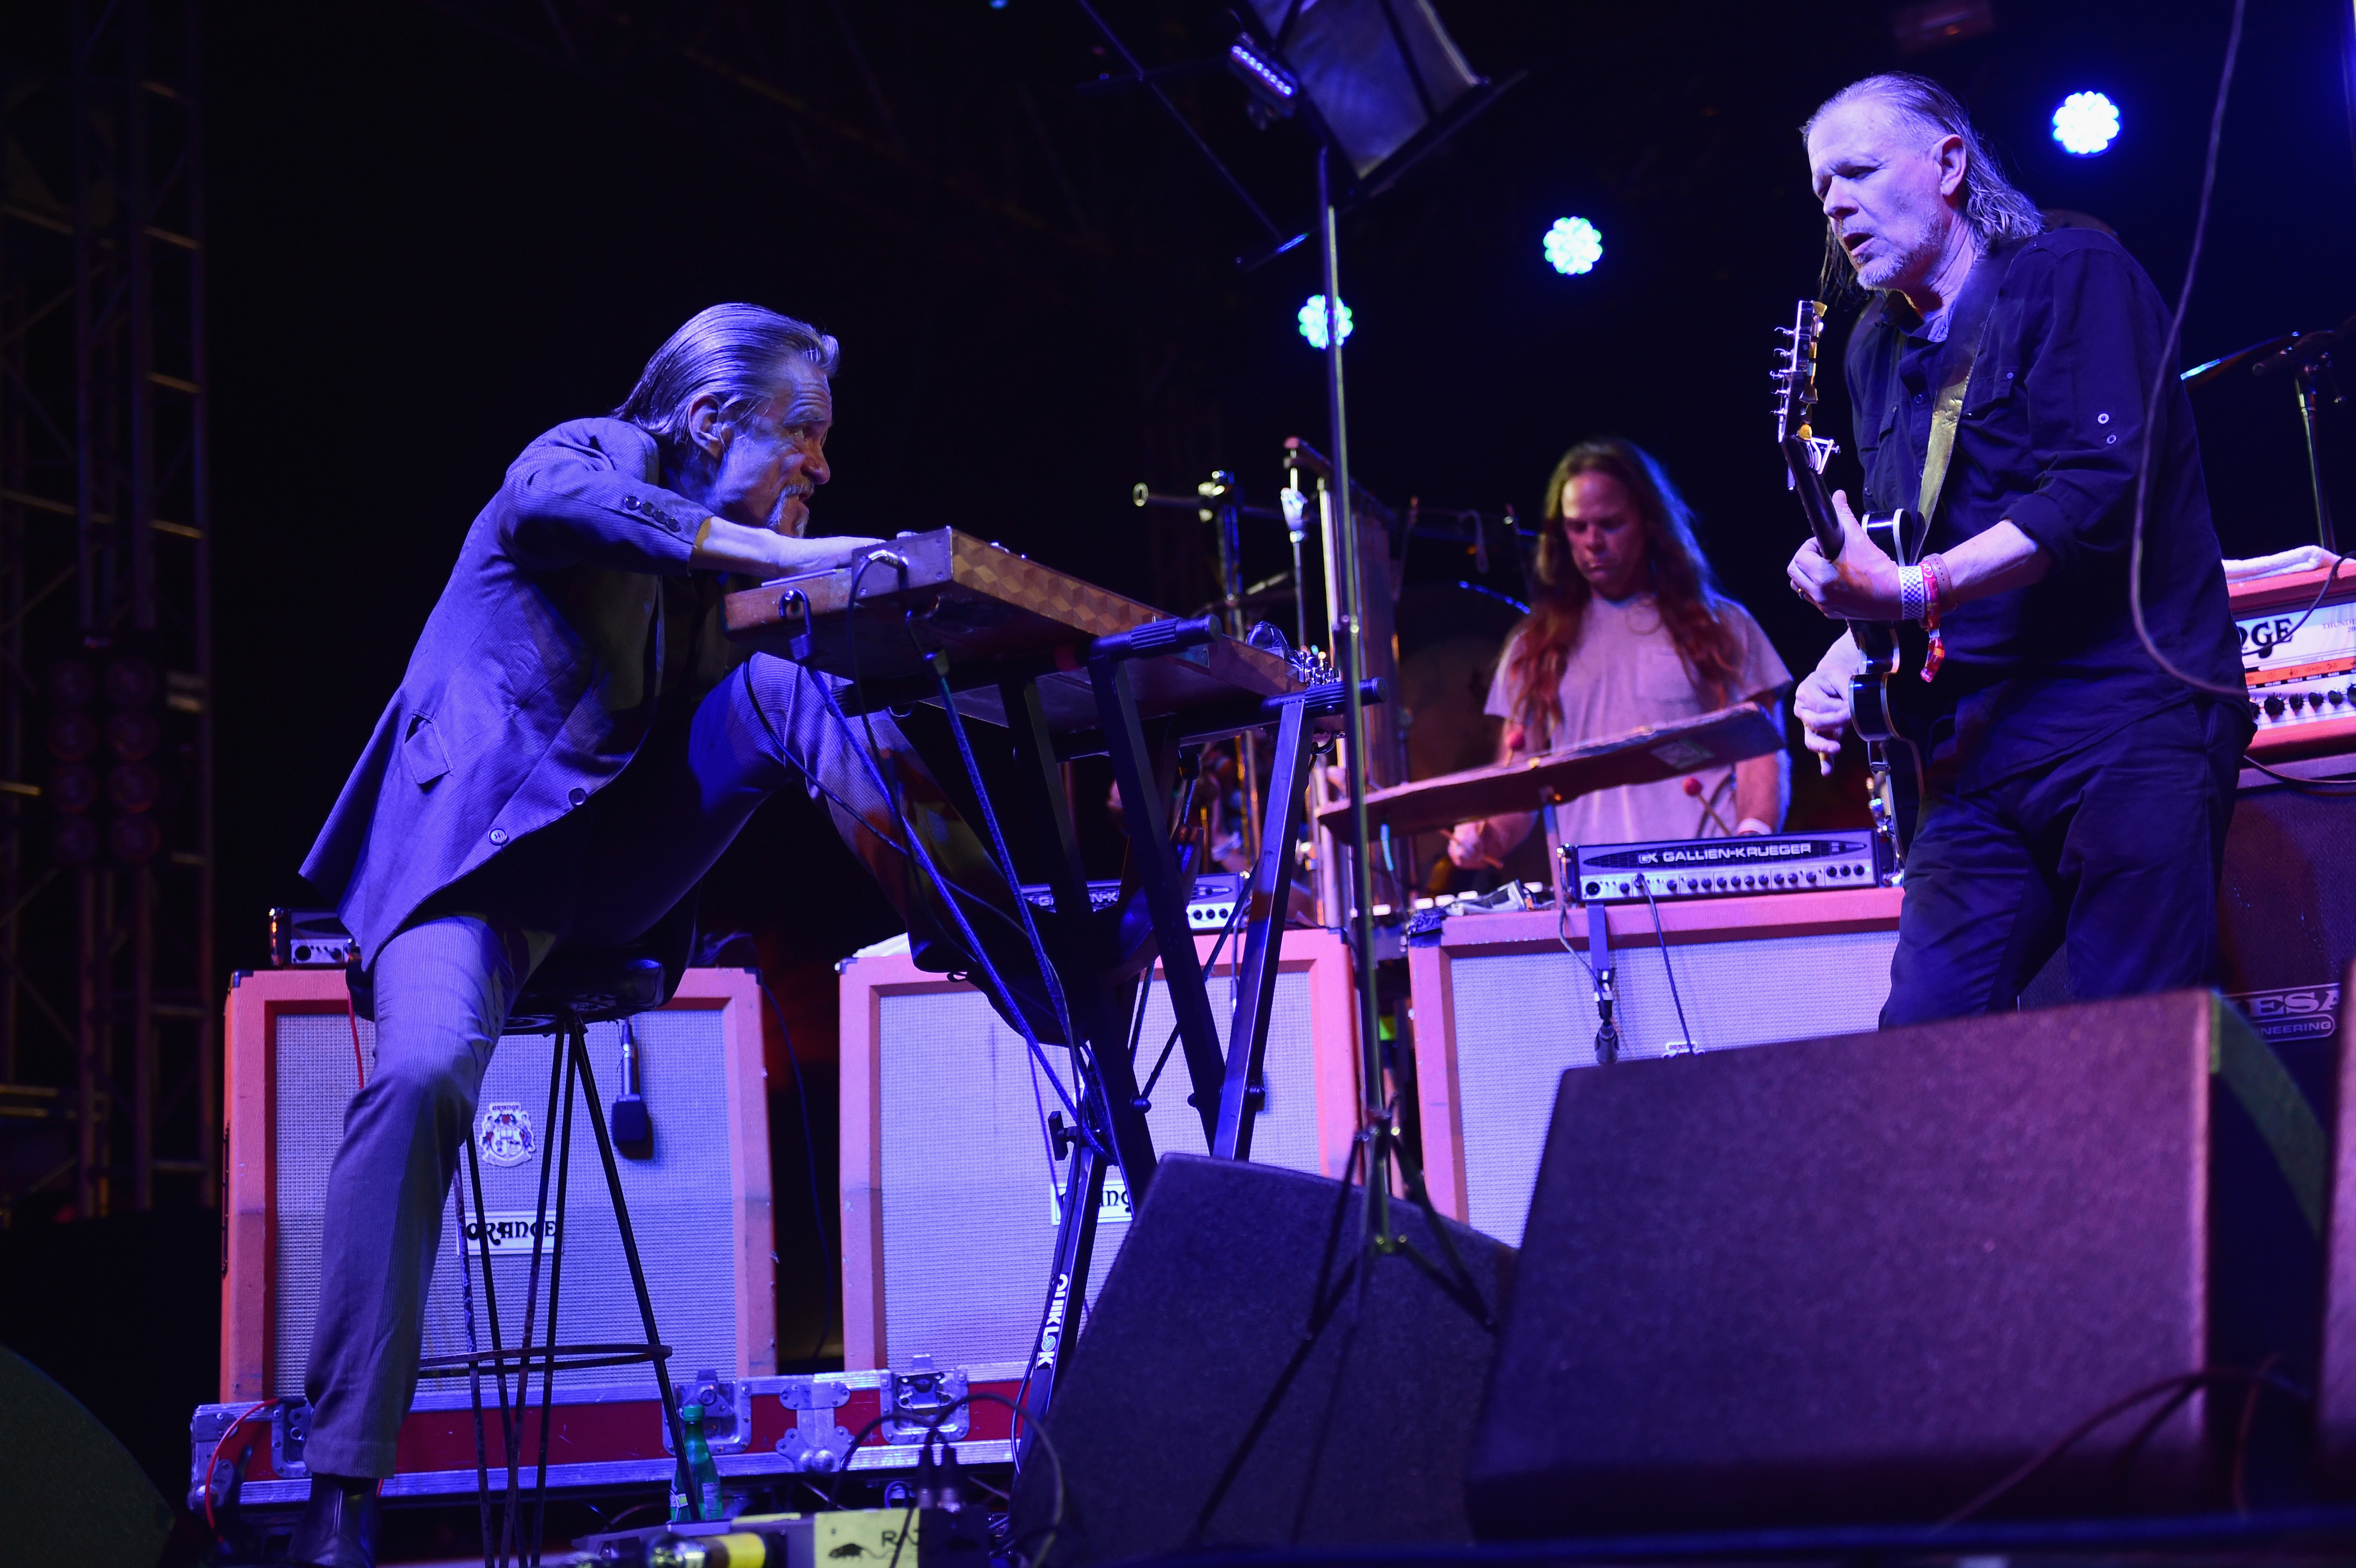 Swans at 2015 Coachella Valley Music And Arts Festival - Weekend 1 - Day 2